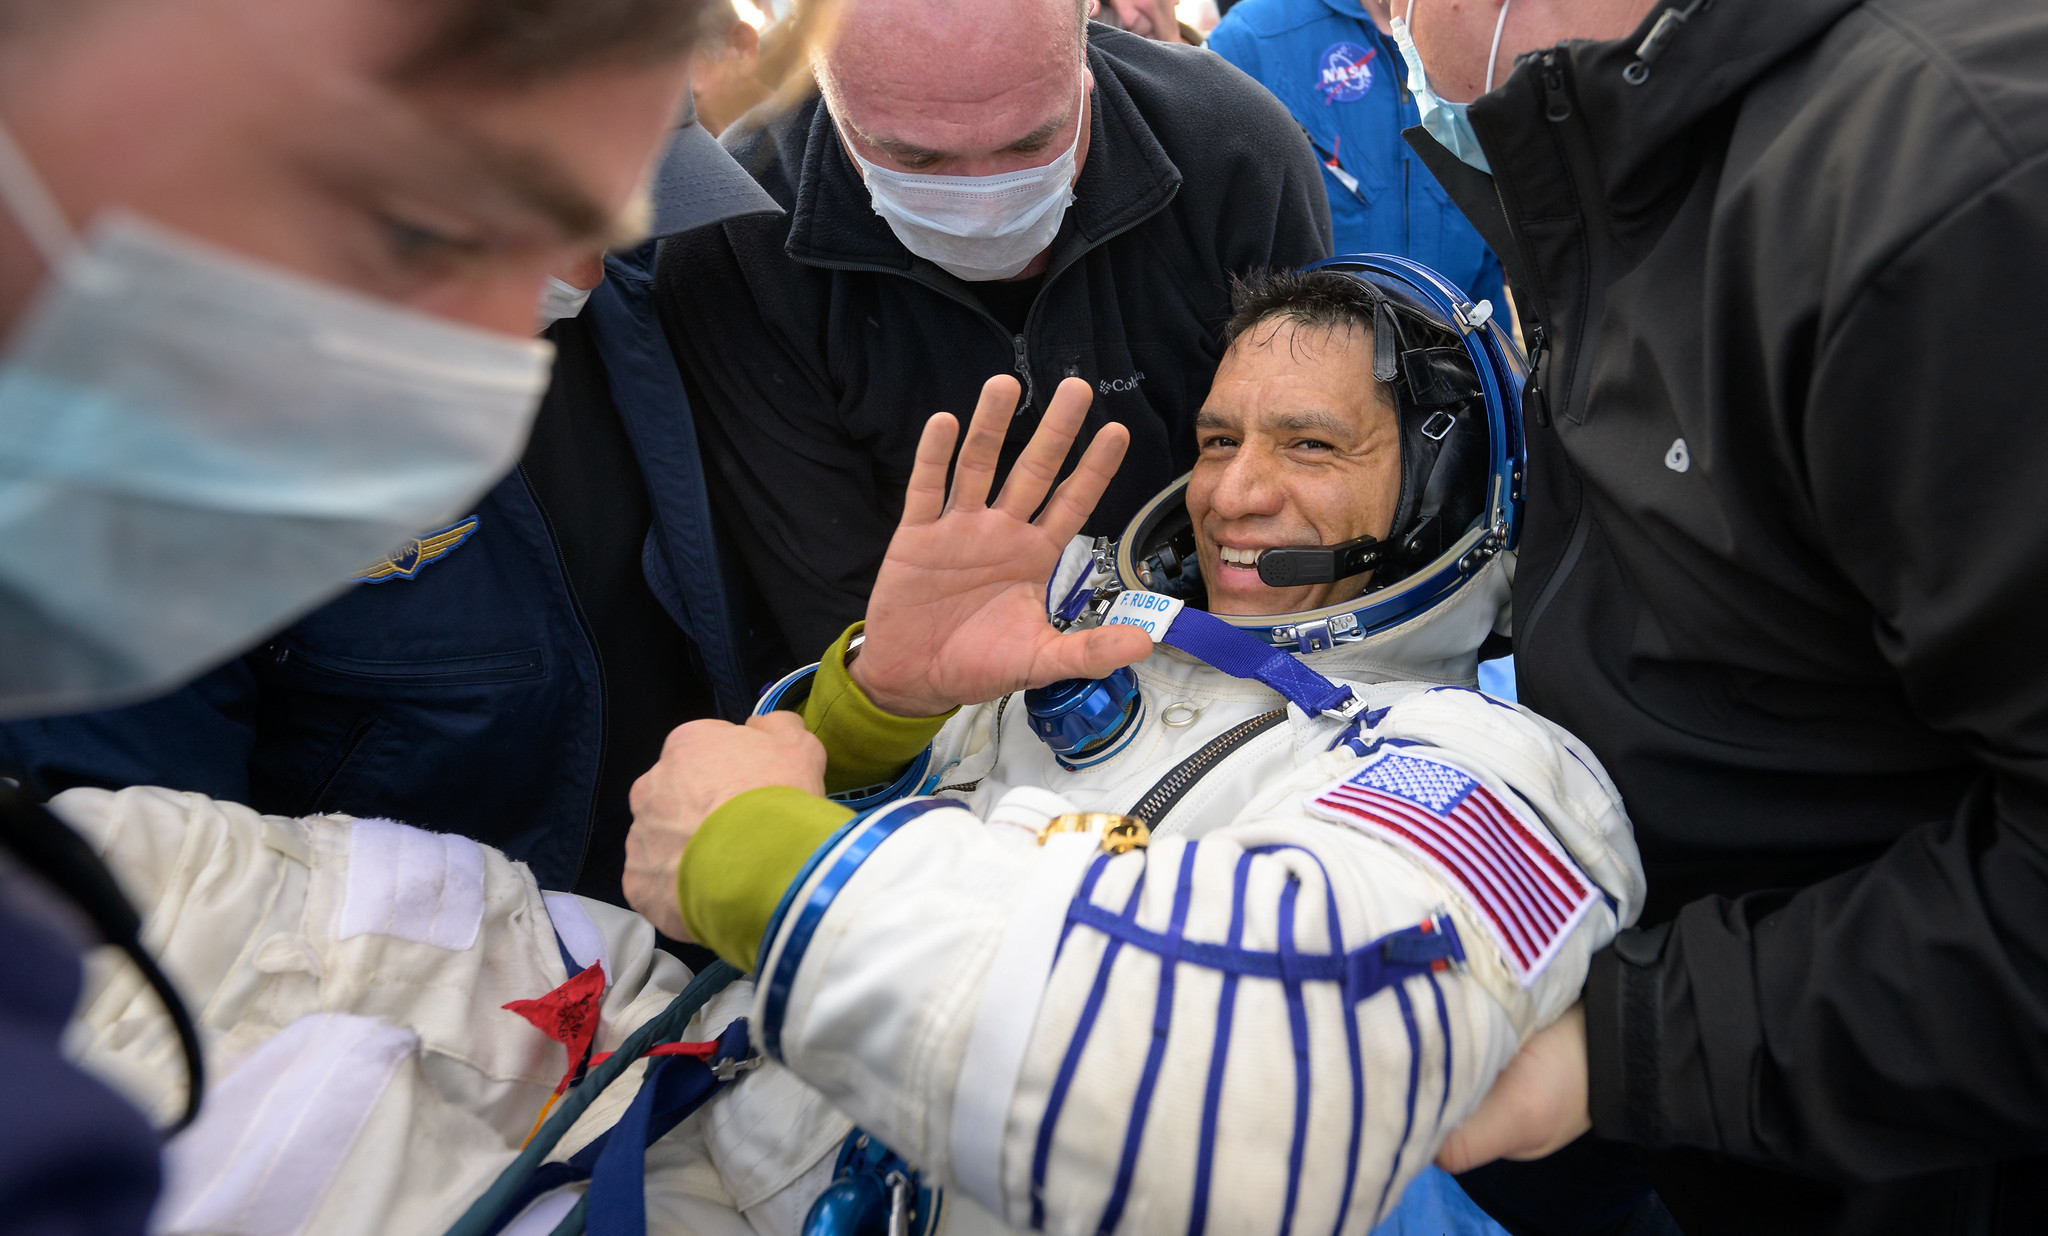 a man in a space suit waves at the camera